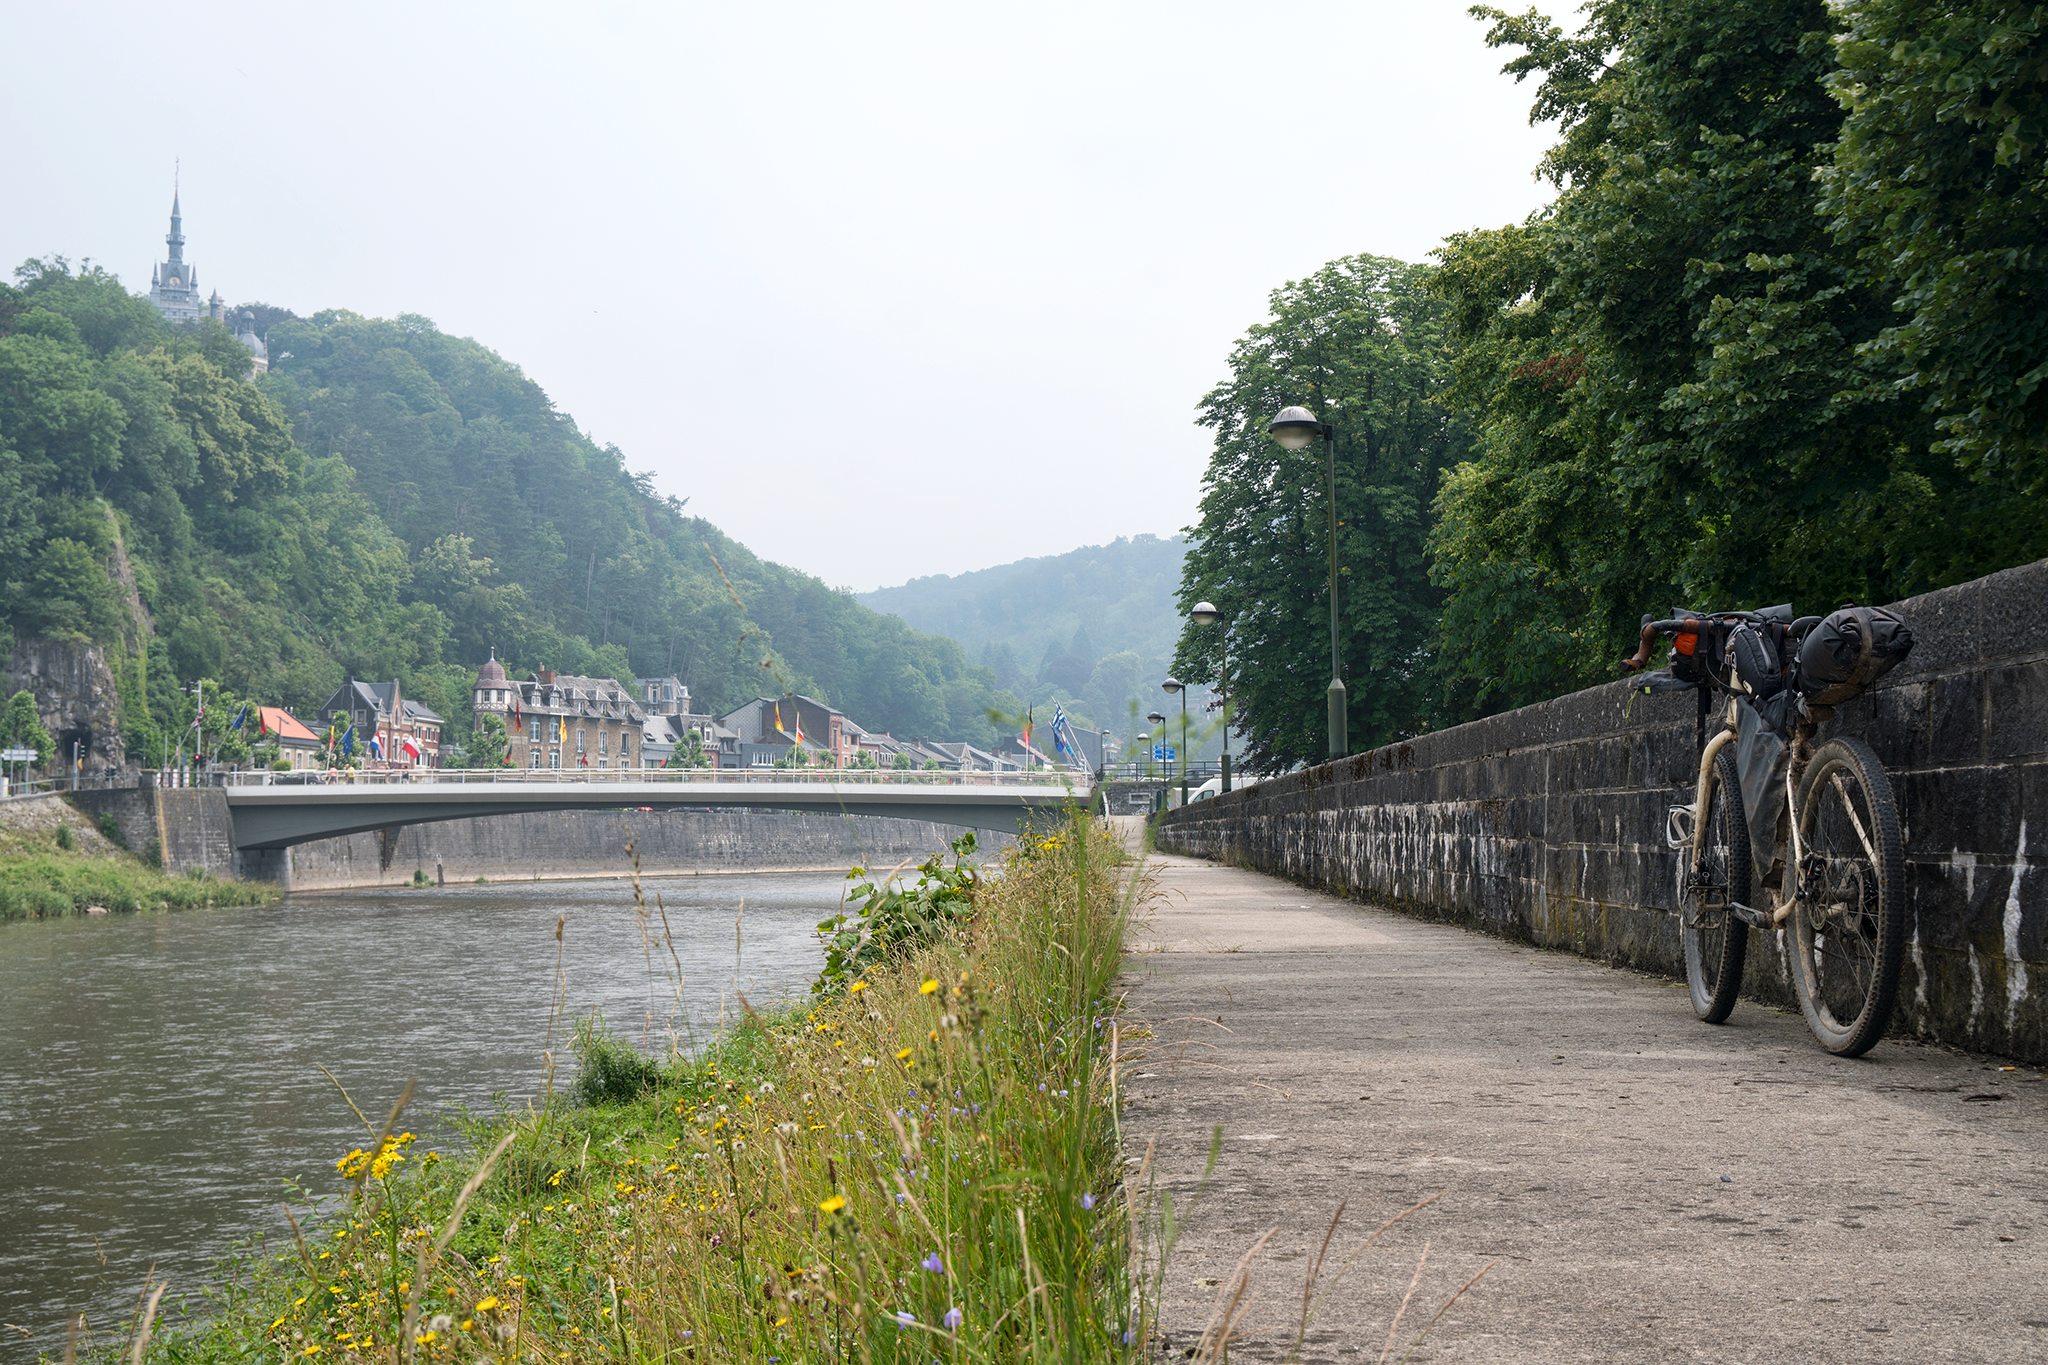  I pop out of the forest onto the banks of the Ourthe river, 15 kilometers south of Liège. A paved cycle path, the RV7, follows the meandering river into the heart of the city where the best  gaufres  on the planet can be found.  I pick up speed and 